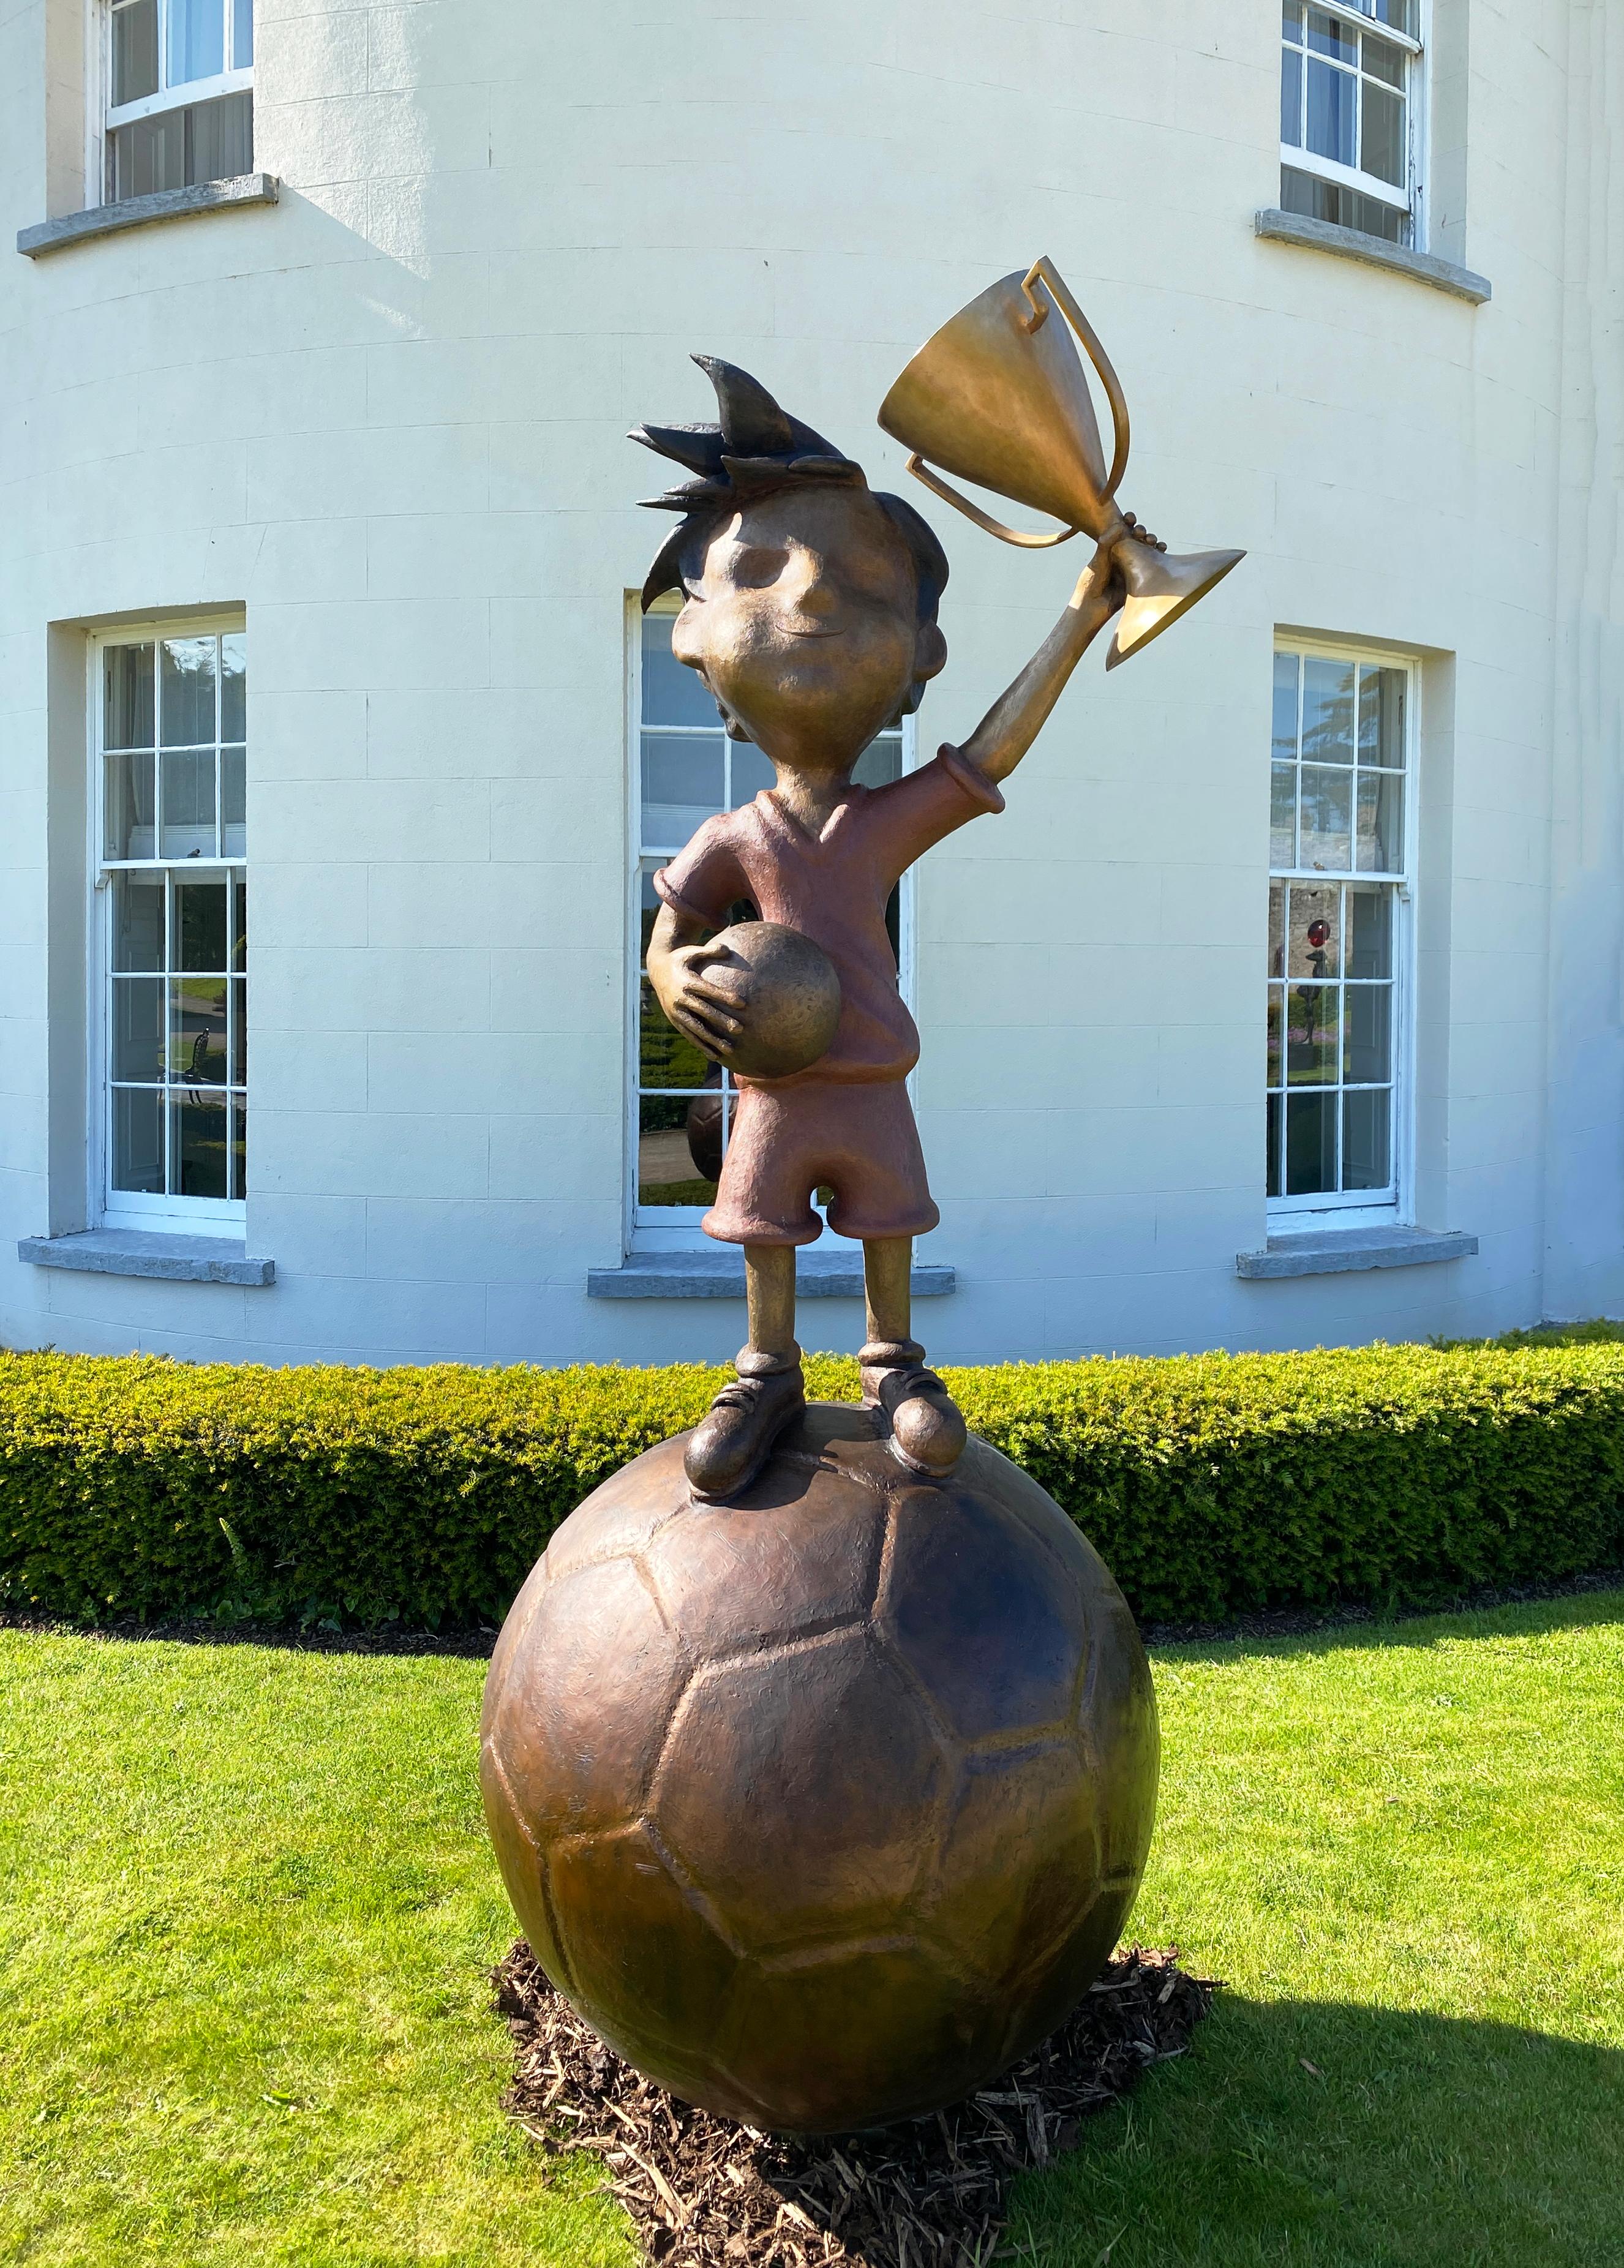 The Champion - Sculpture by Ian Pollock